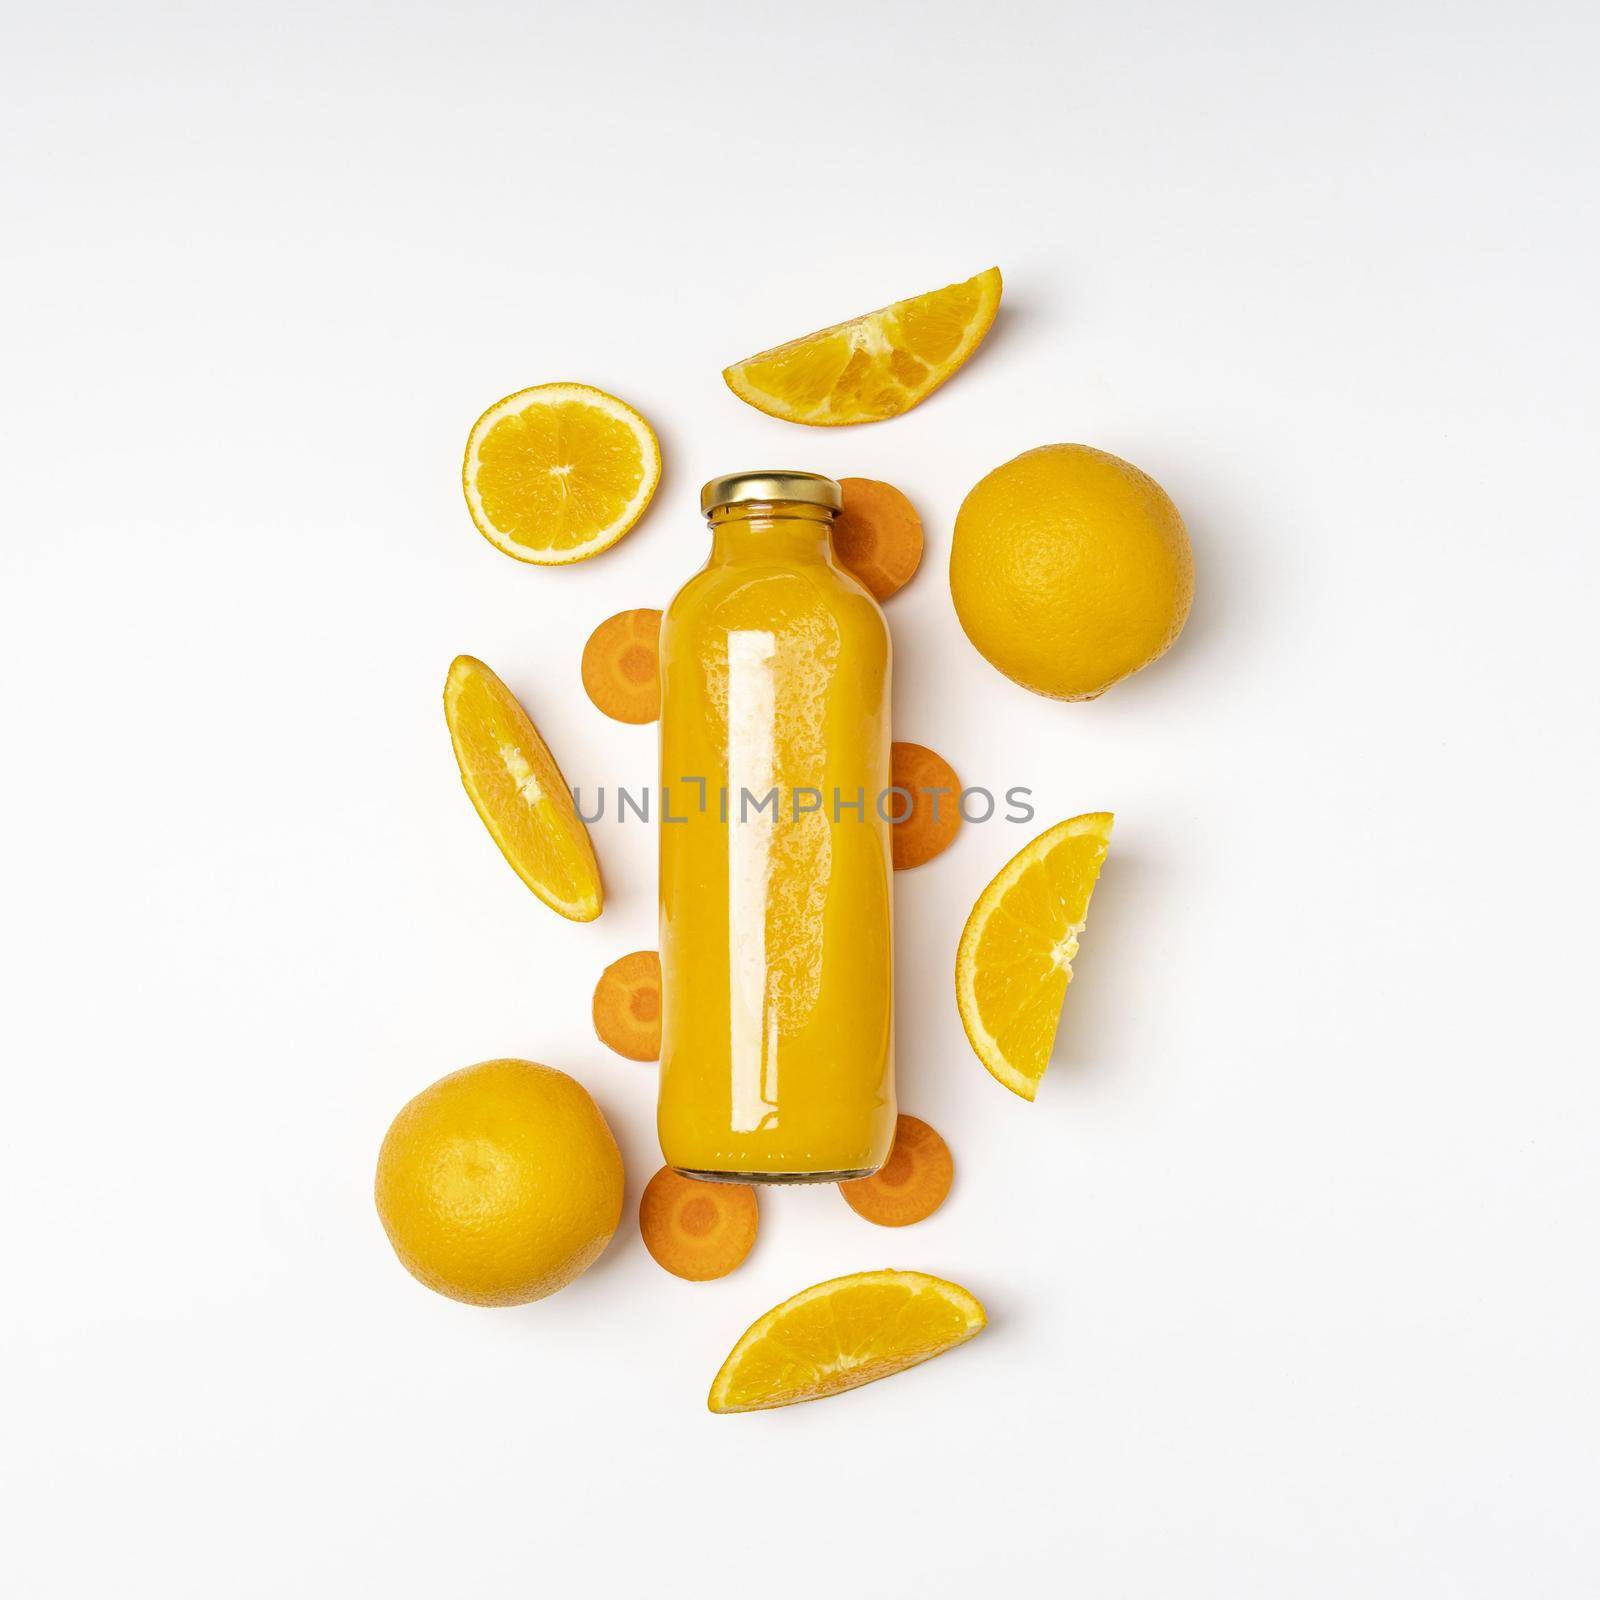 top view orange juice bottle2. High quality beautiful photo concept by Zahard